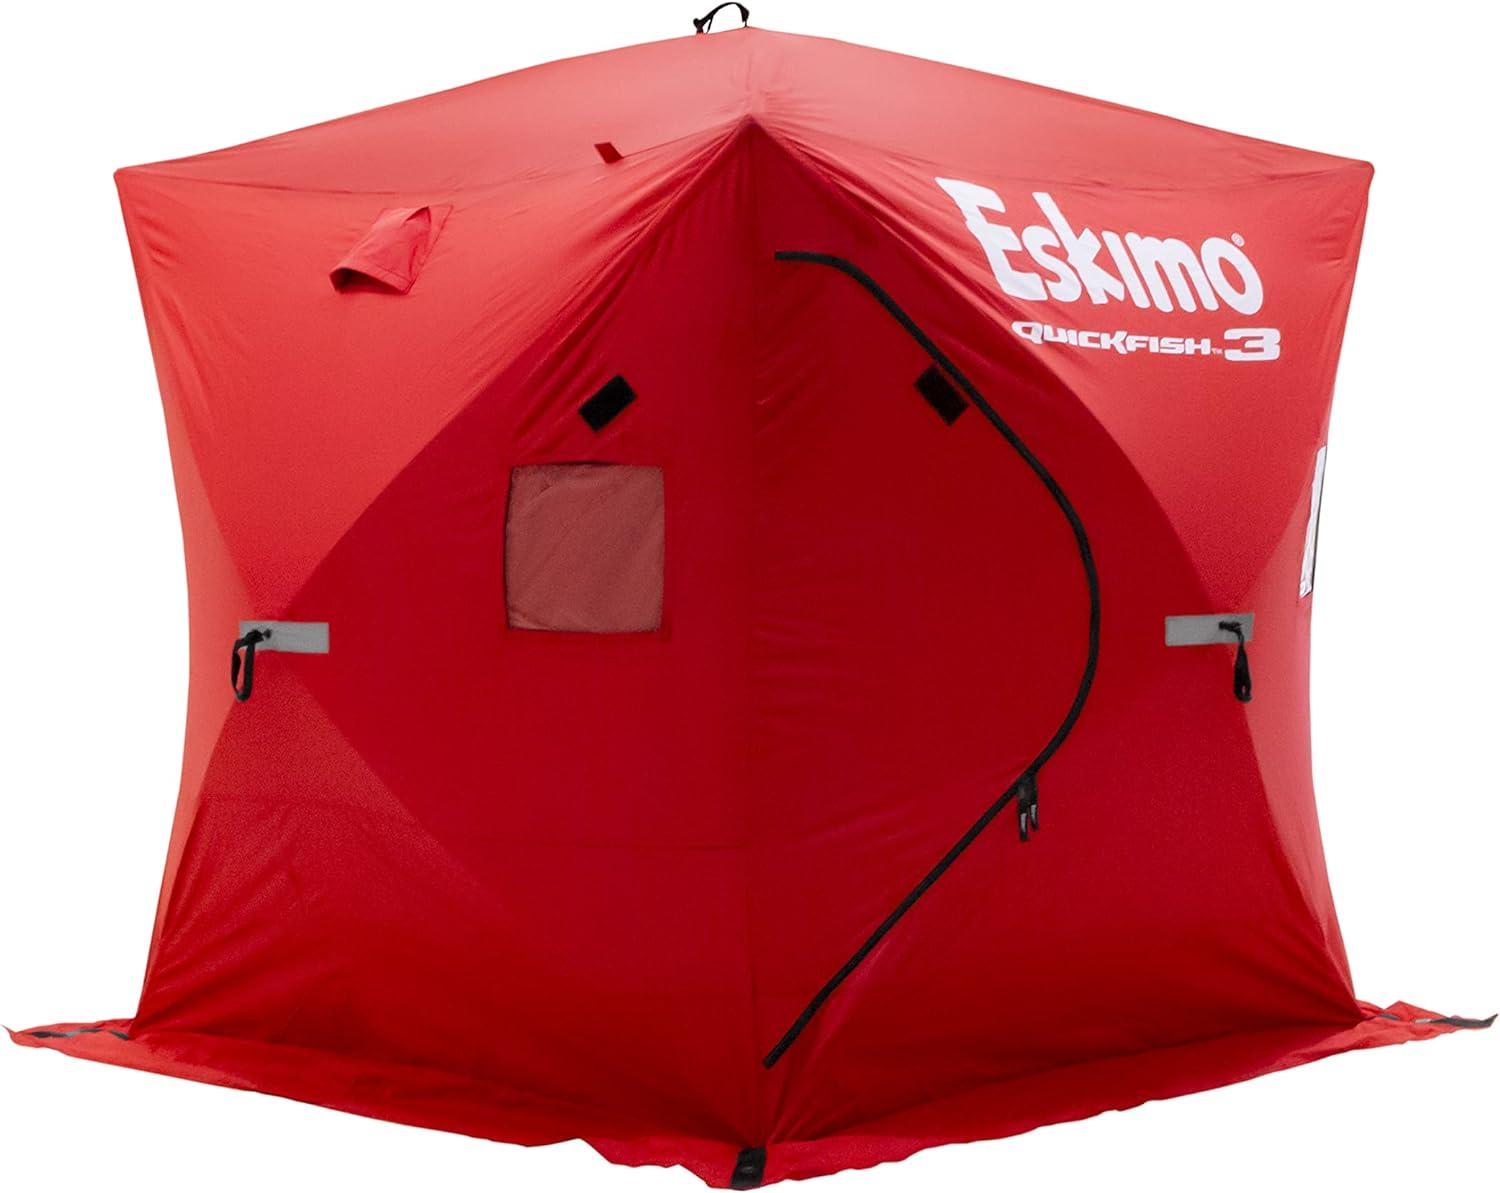 Eskimo Quickfish 3 Hub-Style 3 Person Ice Fishing Shelter for $114.88 Shipped